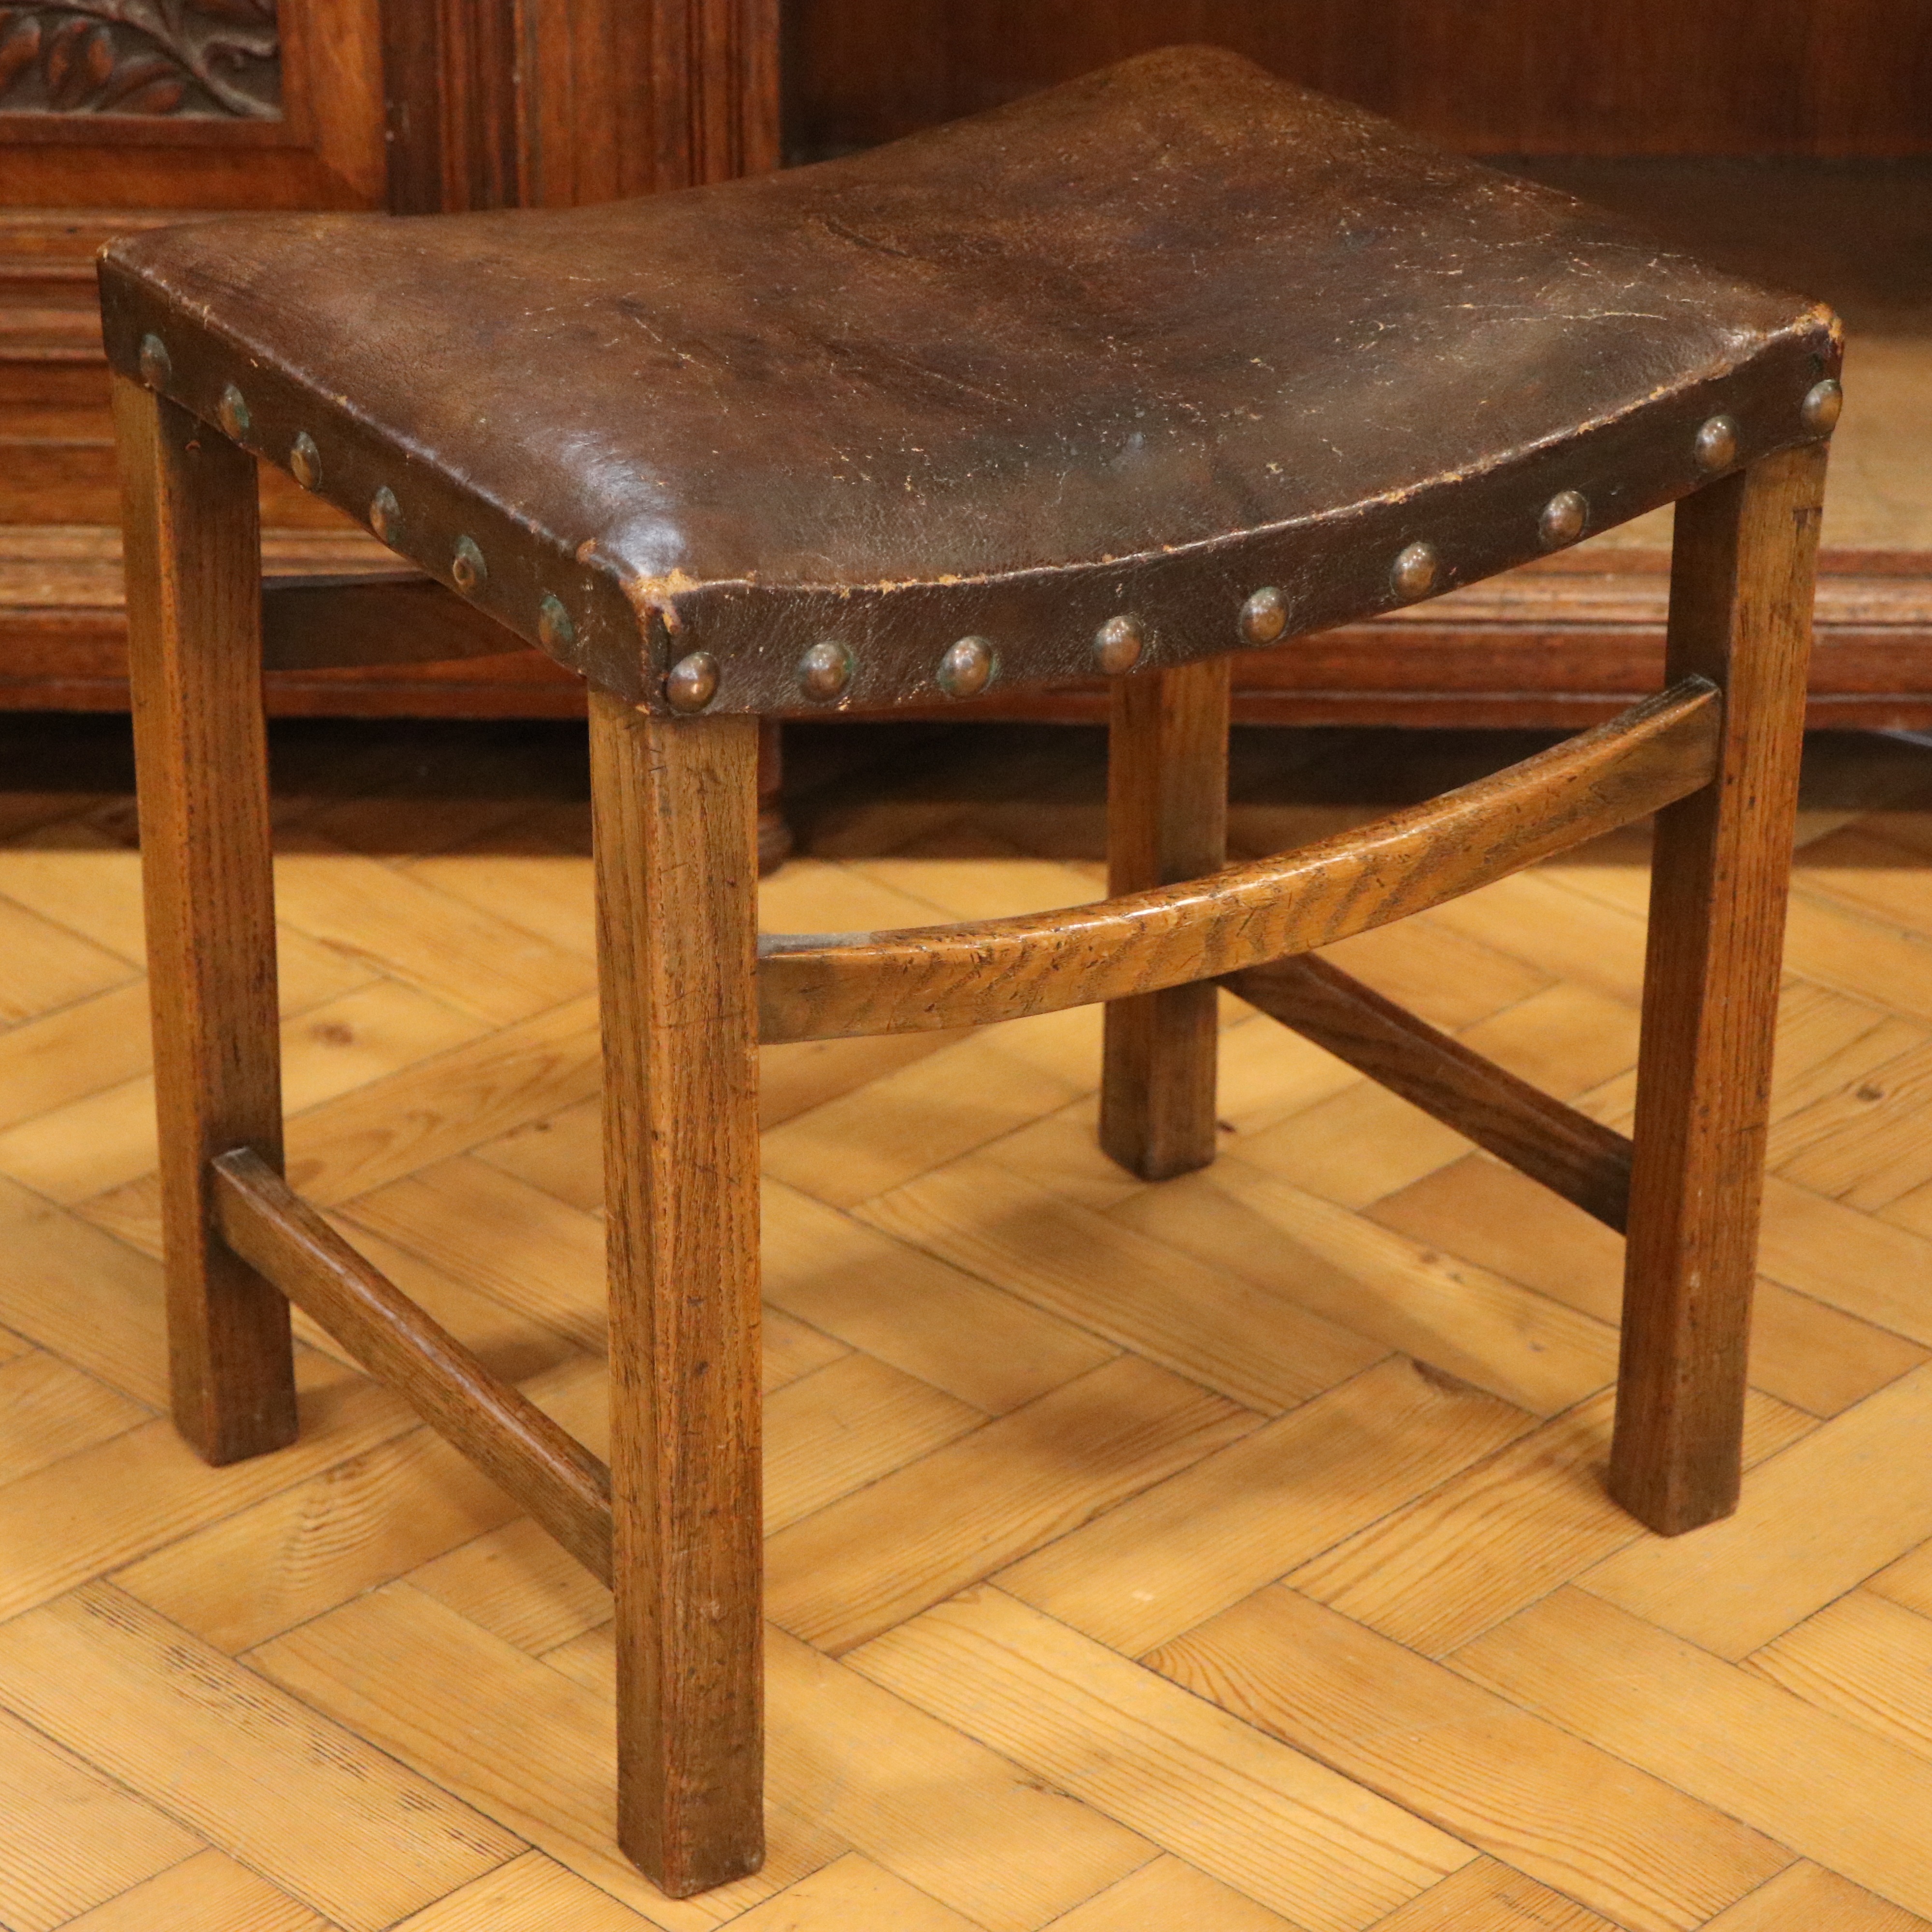 A George V oak dressing table stool, having a period leatherette-upholstered saddle seat with